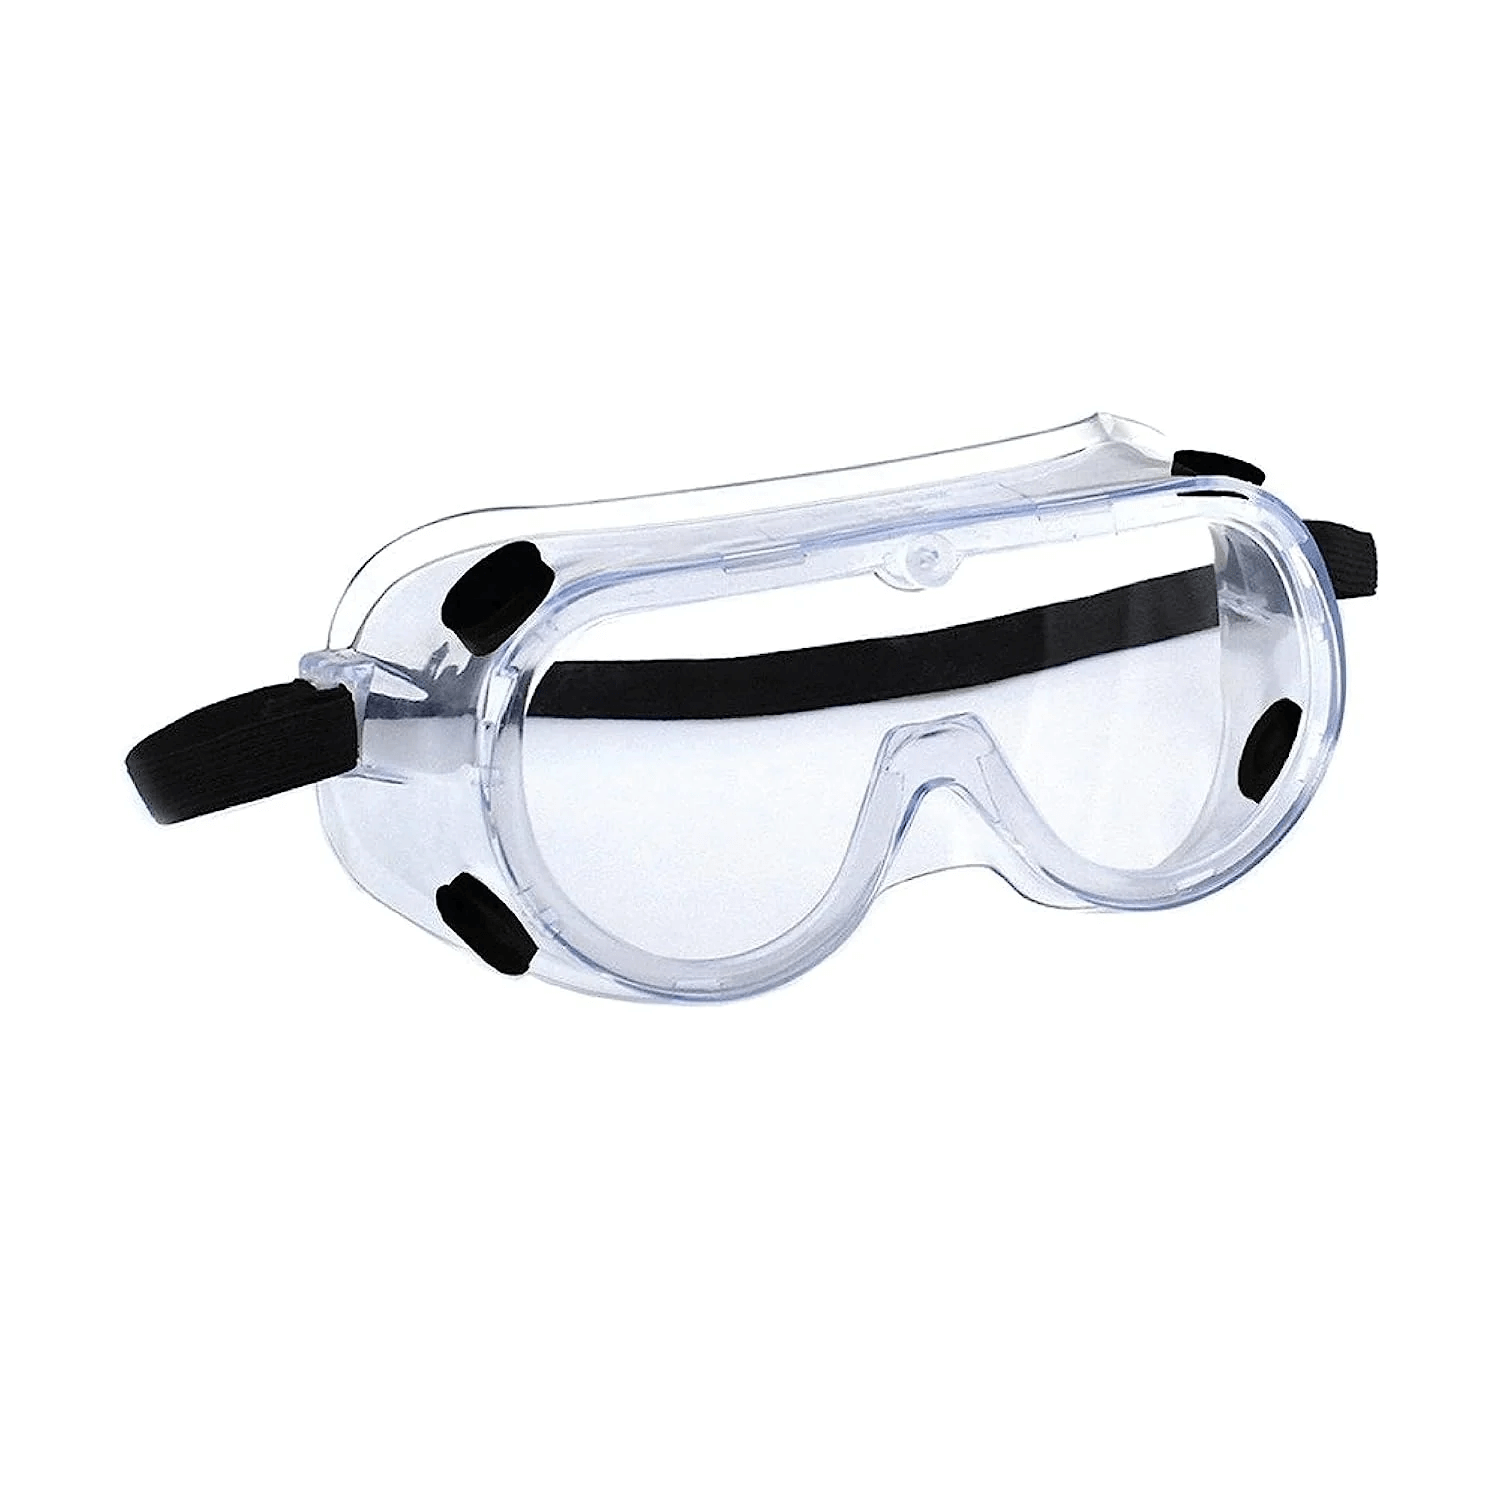 robustt-safety-goggles-for-chemical-protection-with-an-adjustable-strap-and-minimum-lens-fogging-pack-of-1